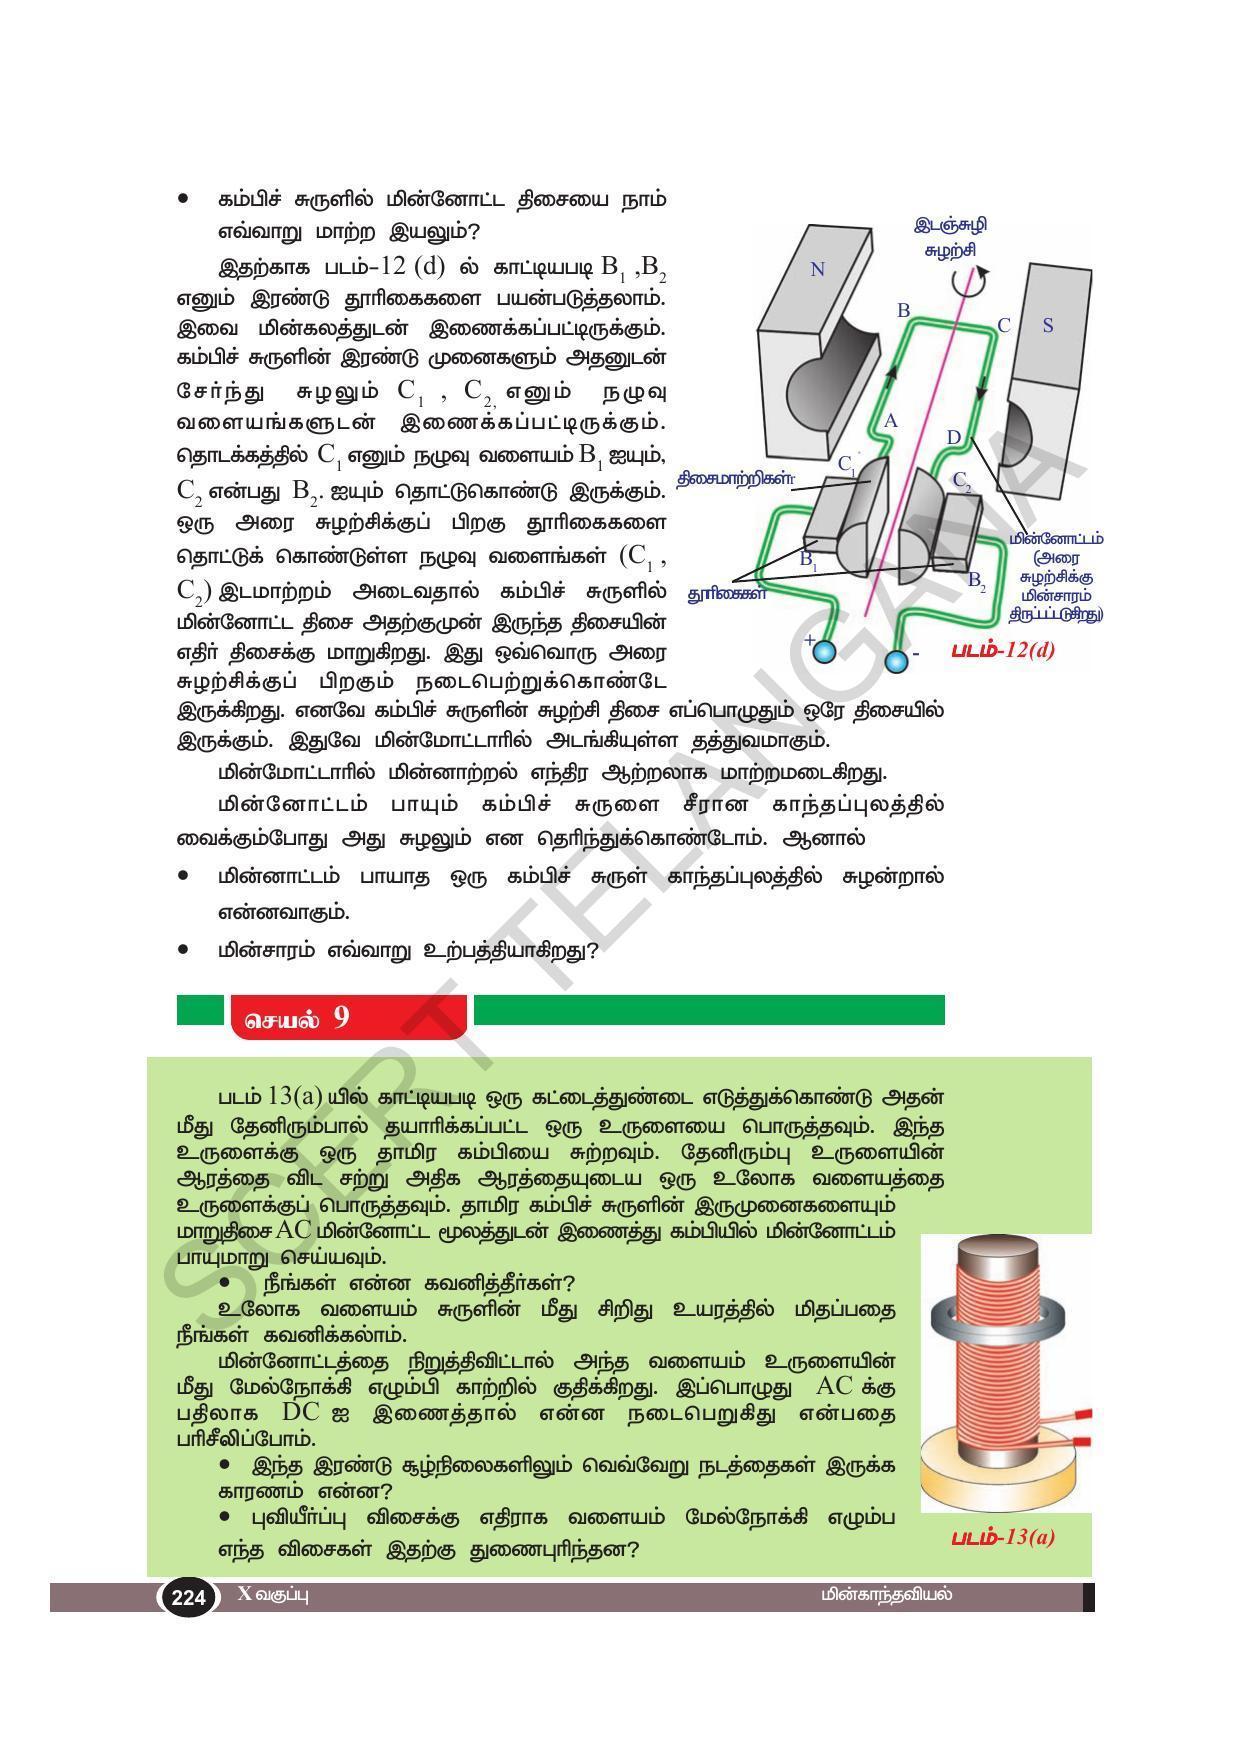 TS SCERT Class 10 Physical Science(Tamil Medium) Text Book - Page 236